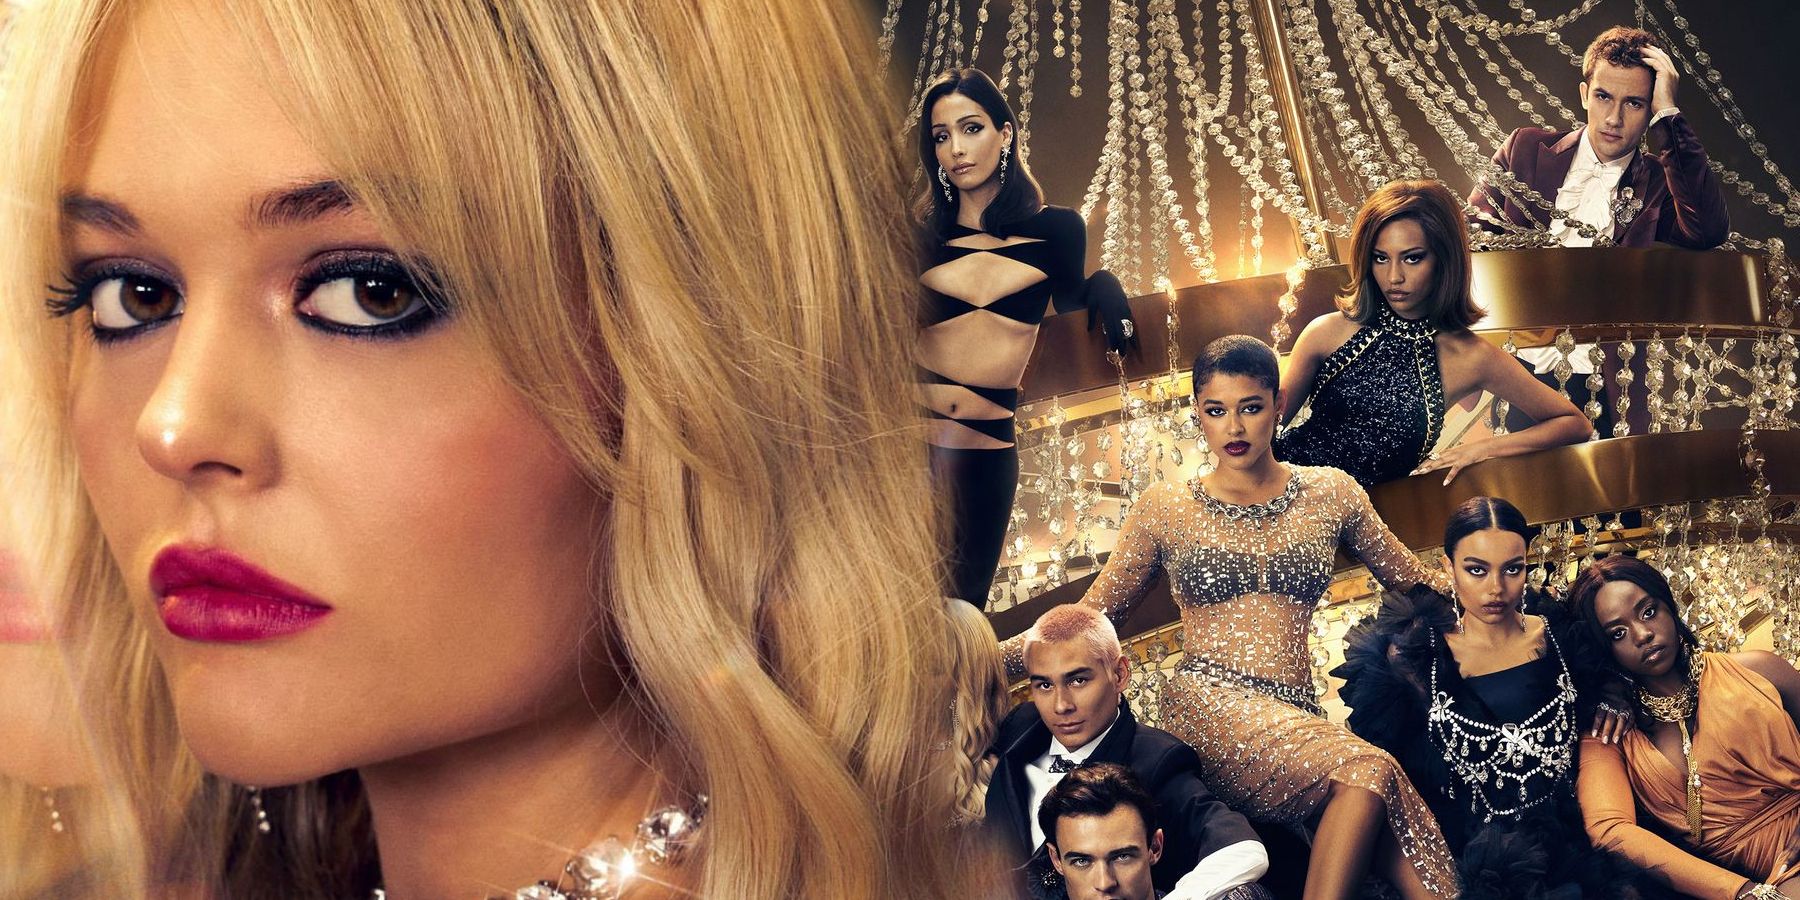 Split image: Emily Alyn Lind poses on a poster for Gossip Girl, the Gossip Girl Season 2 cast sits together on poster